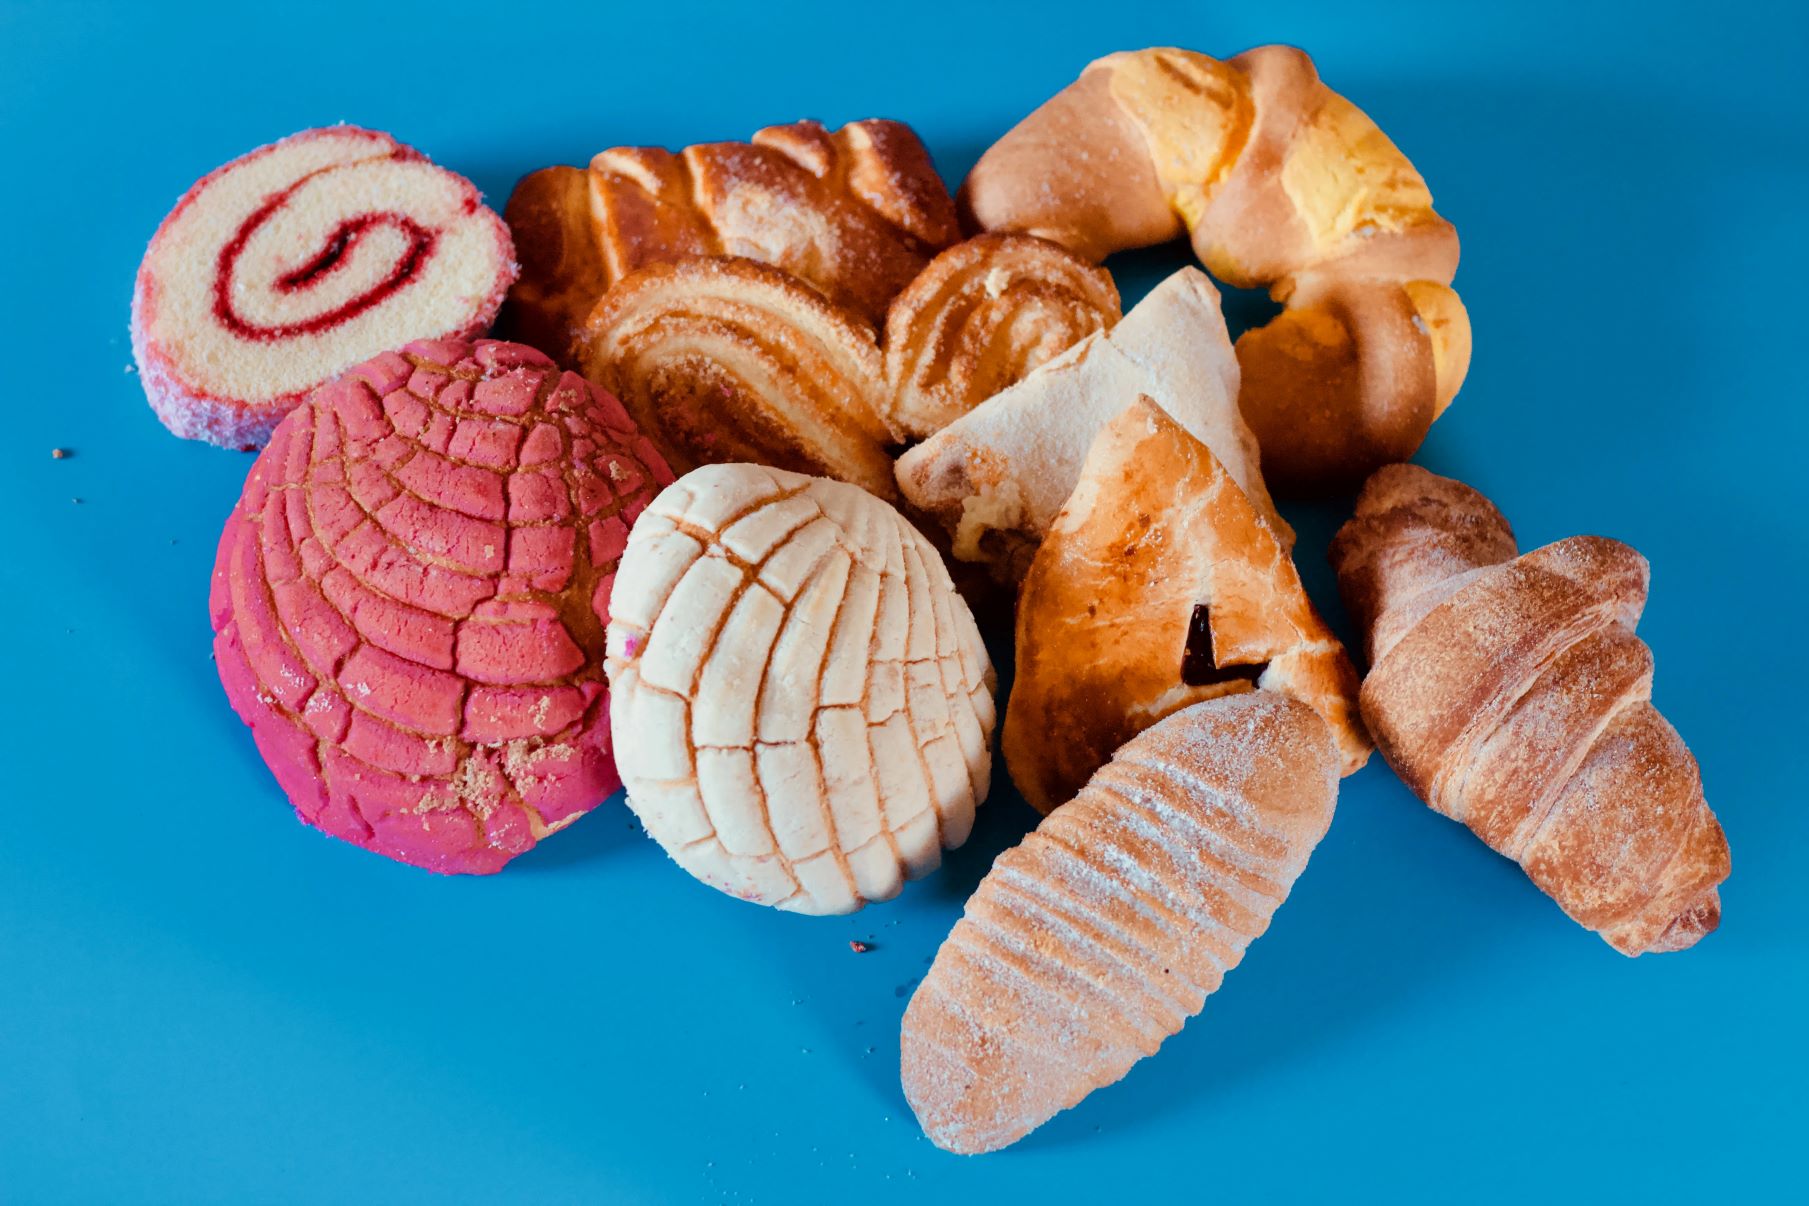 19-pan-dulce-nutrition-facts